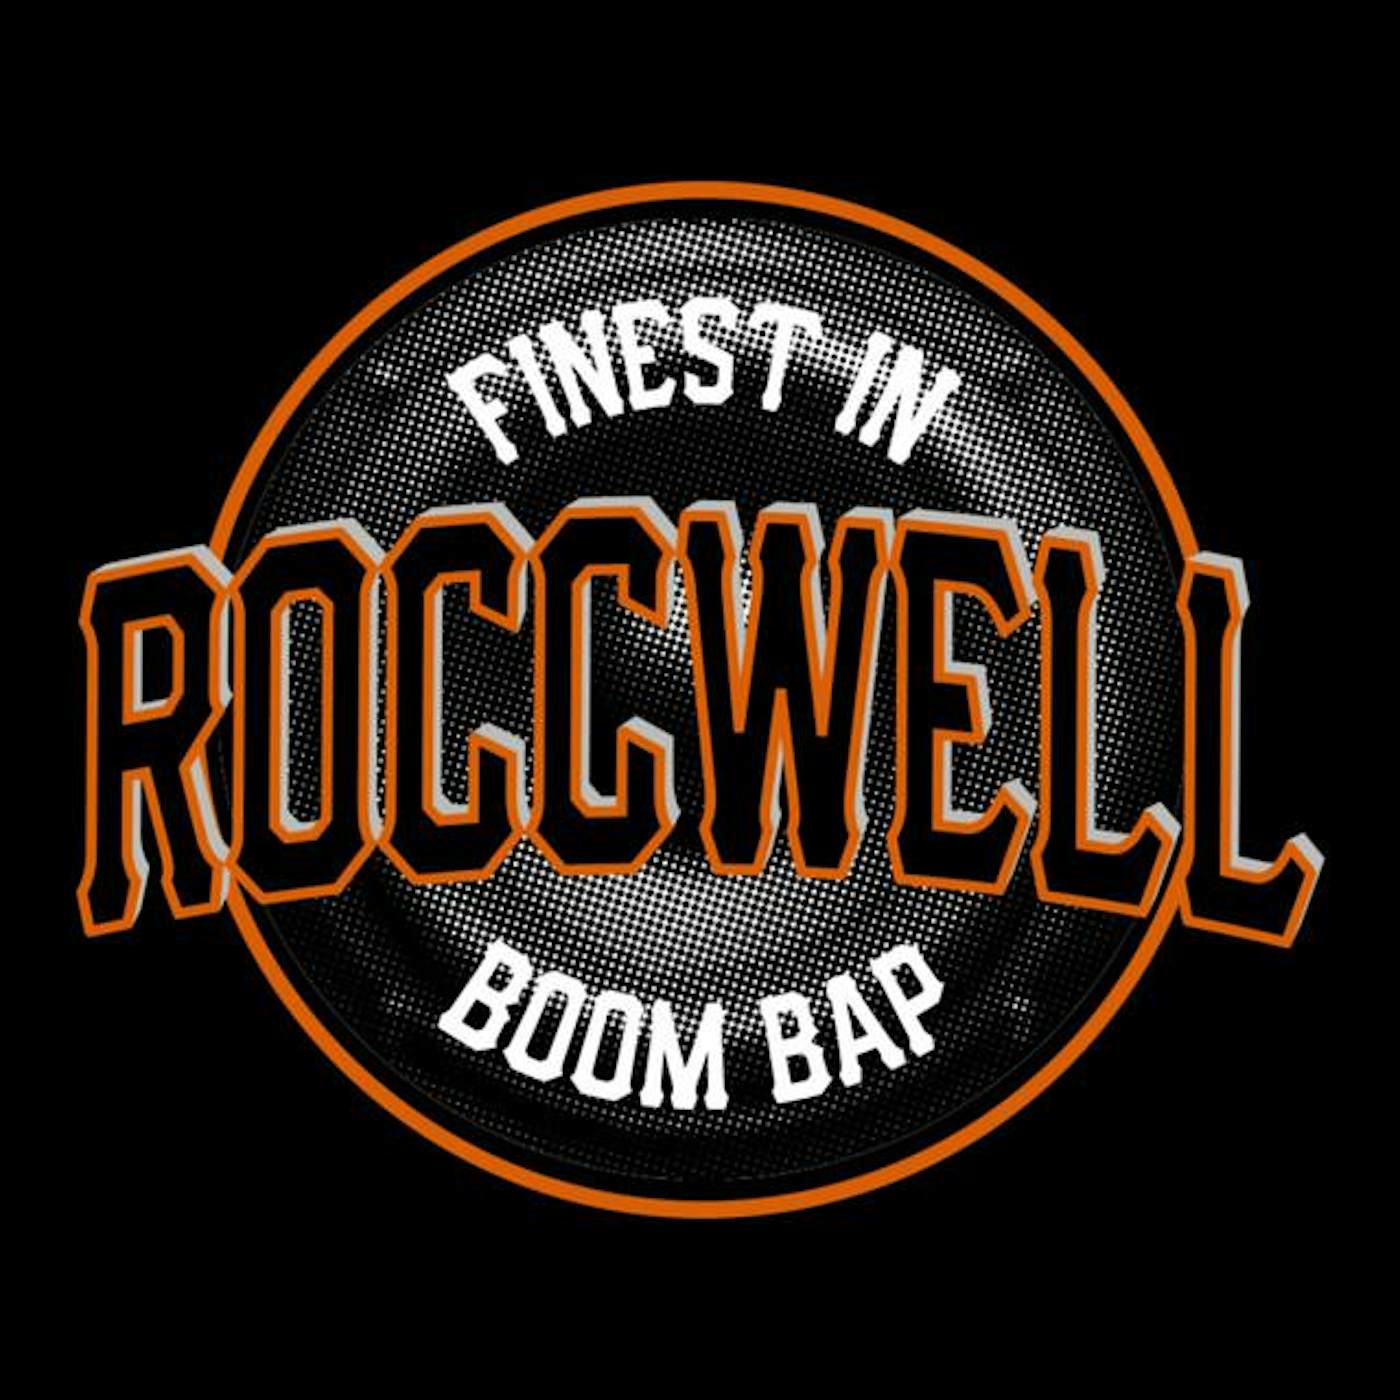 Roccwell